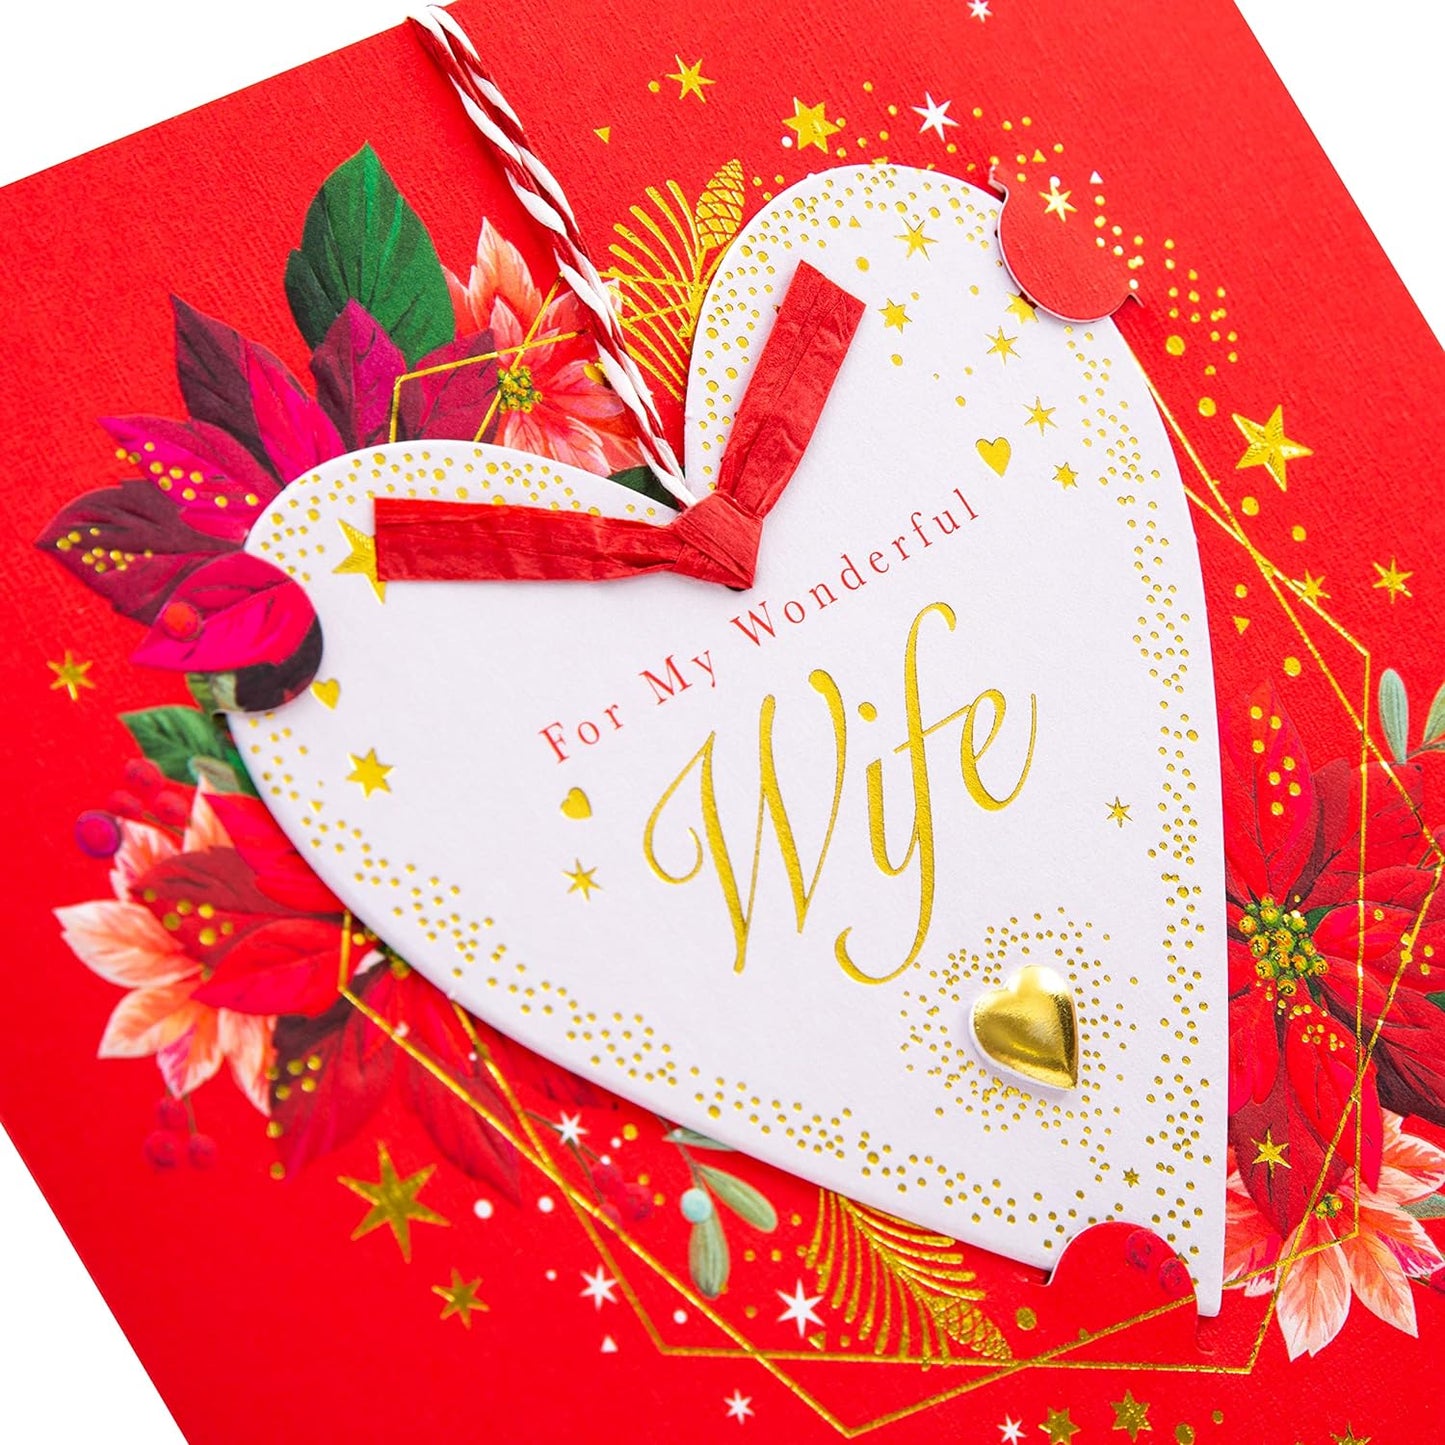 Red Heart Floral Traditional Heart Design with Heartfelt Verse Wife Christmas Card